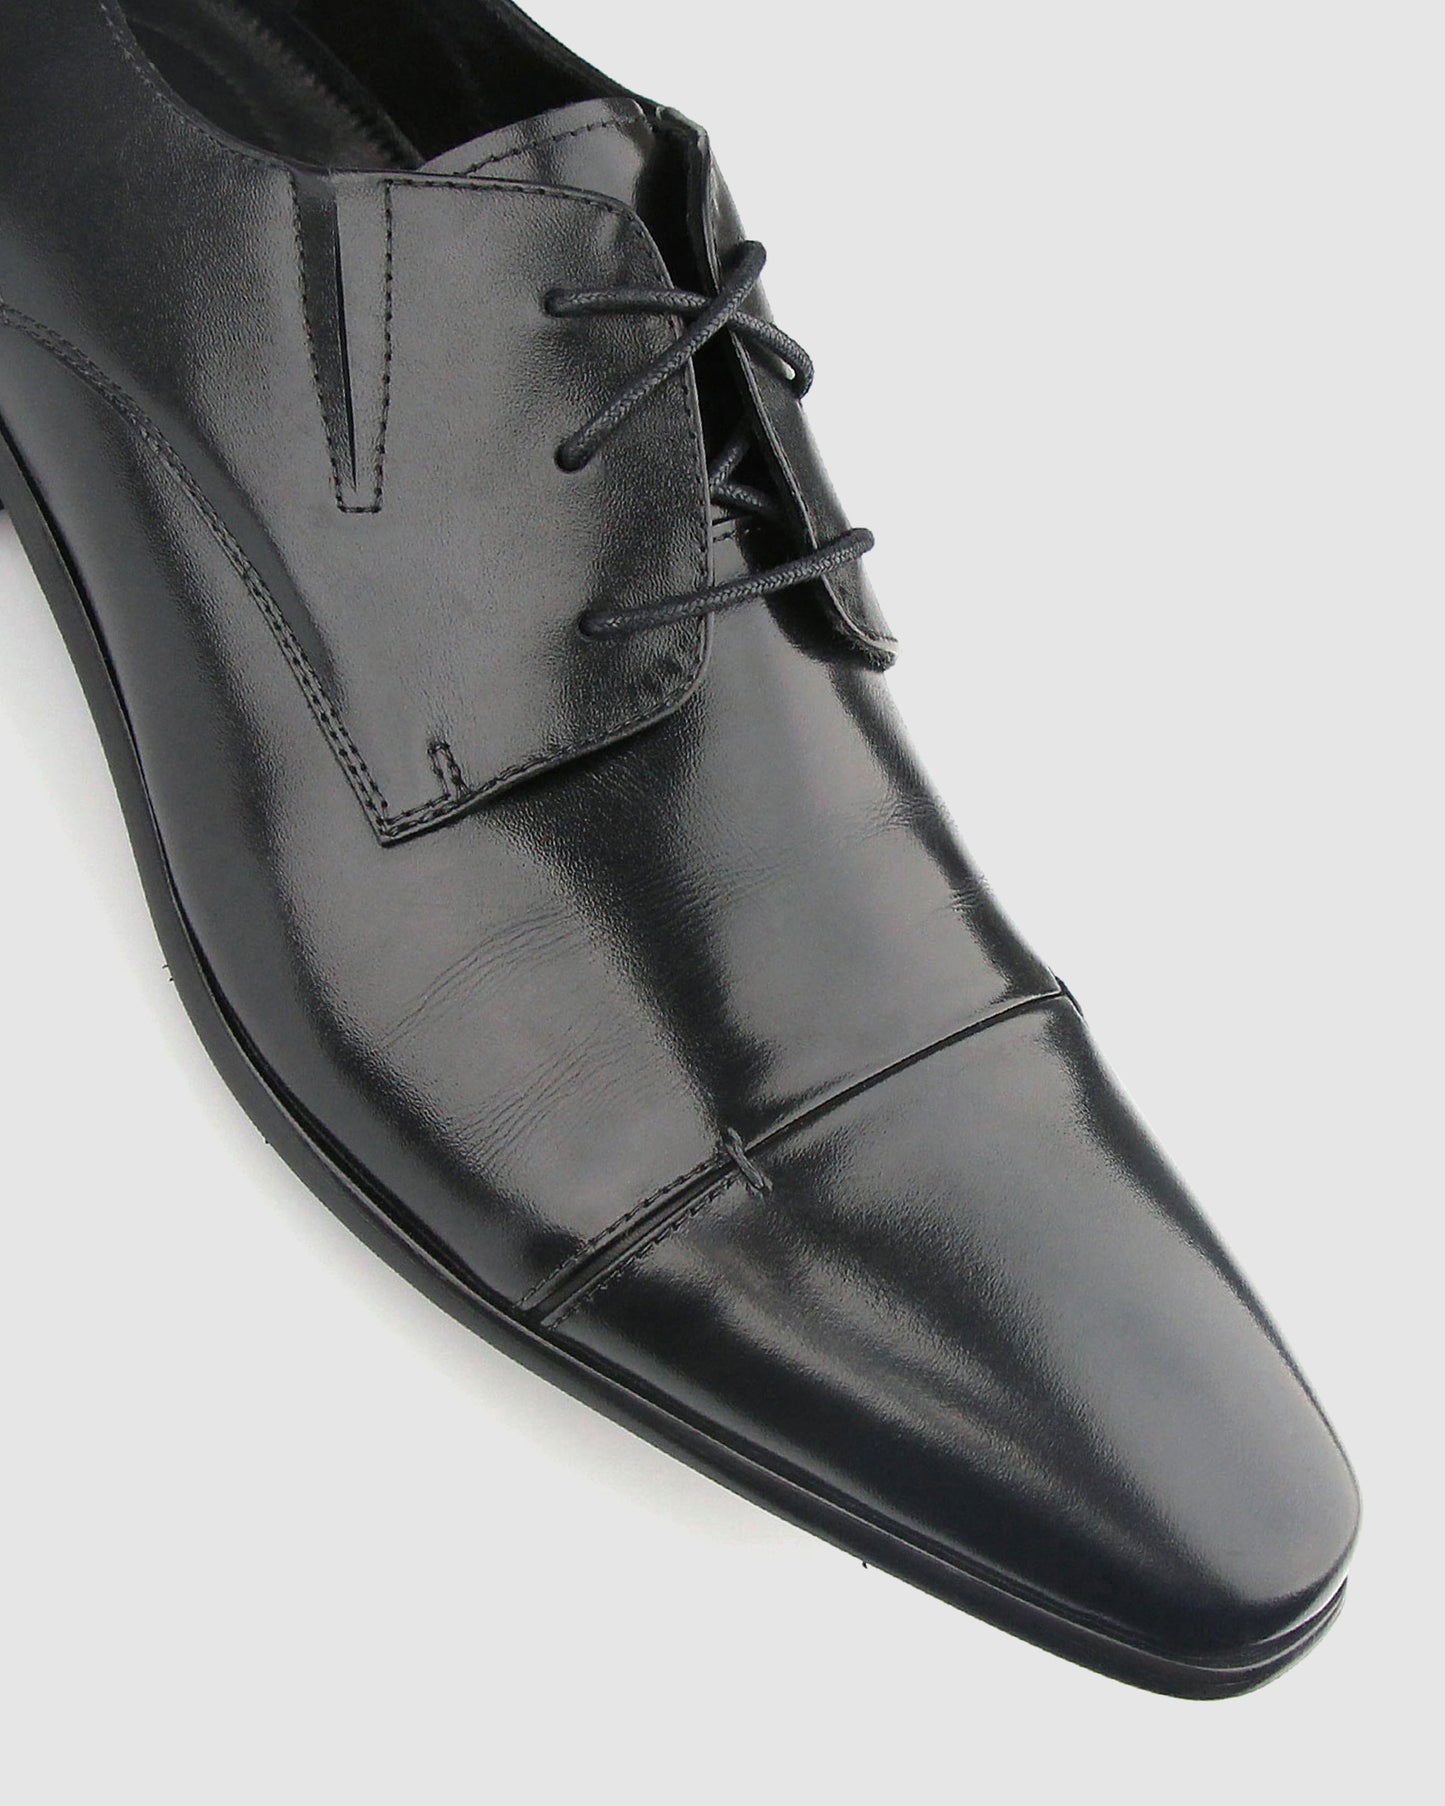 Wider Fit DEFIANT Leather Dress Shoes